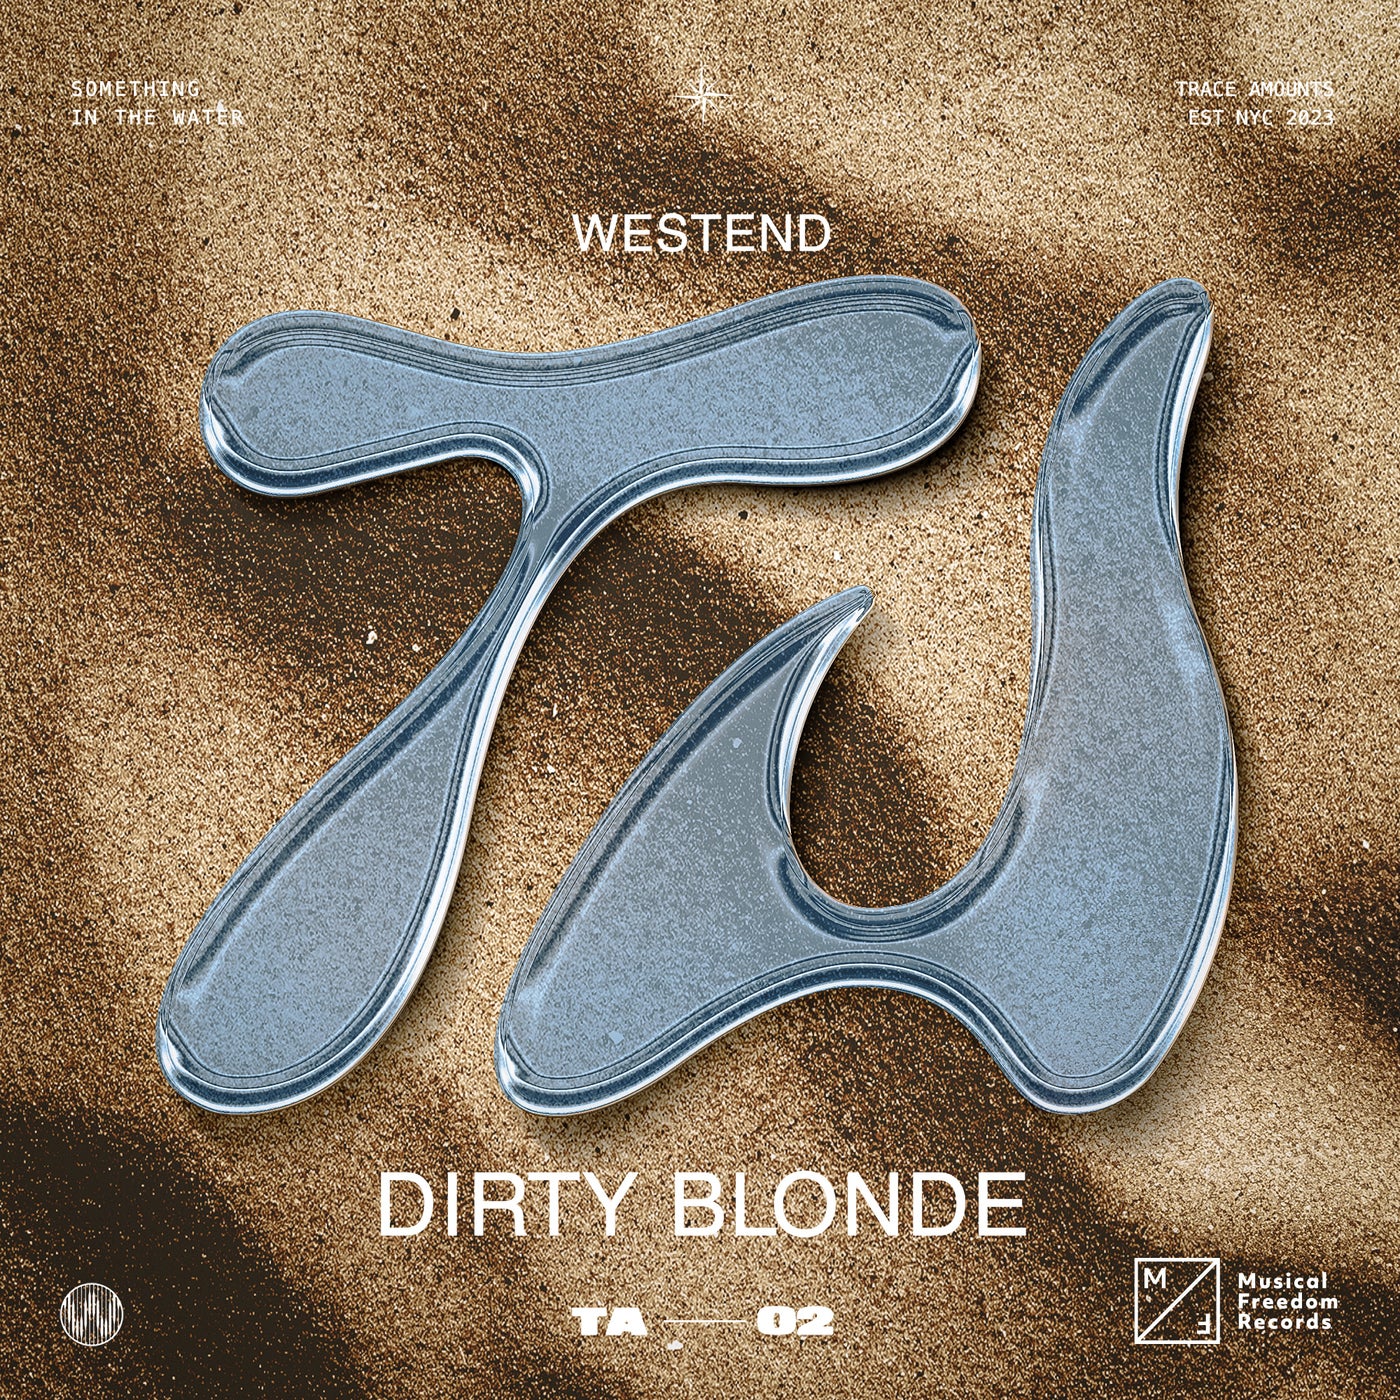 Westend - Dirty Blonde (extended Mix) on Revolution Radio